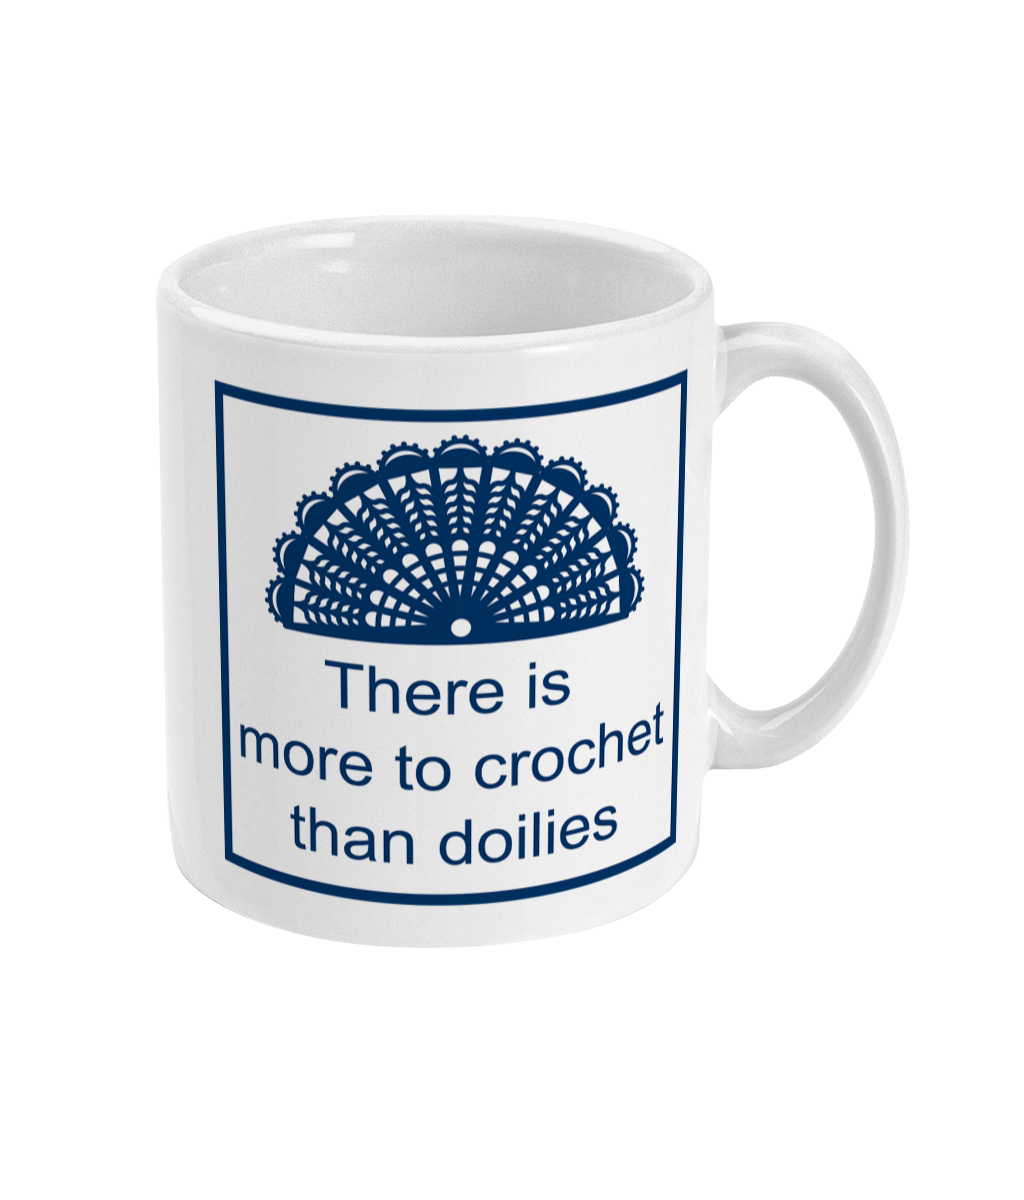 mug with an image of a crochet doily with the text there is more to crochet than doilies